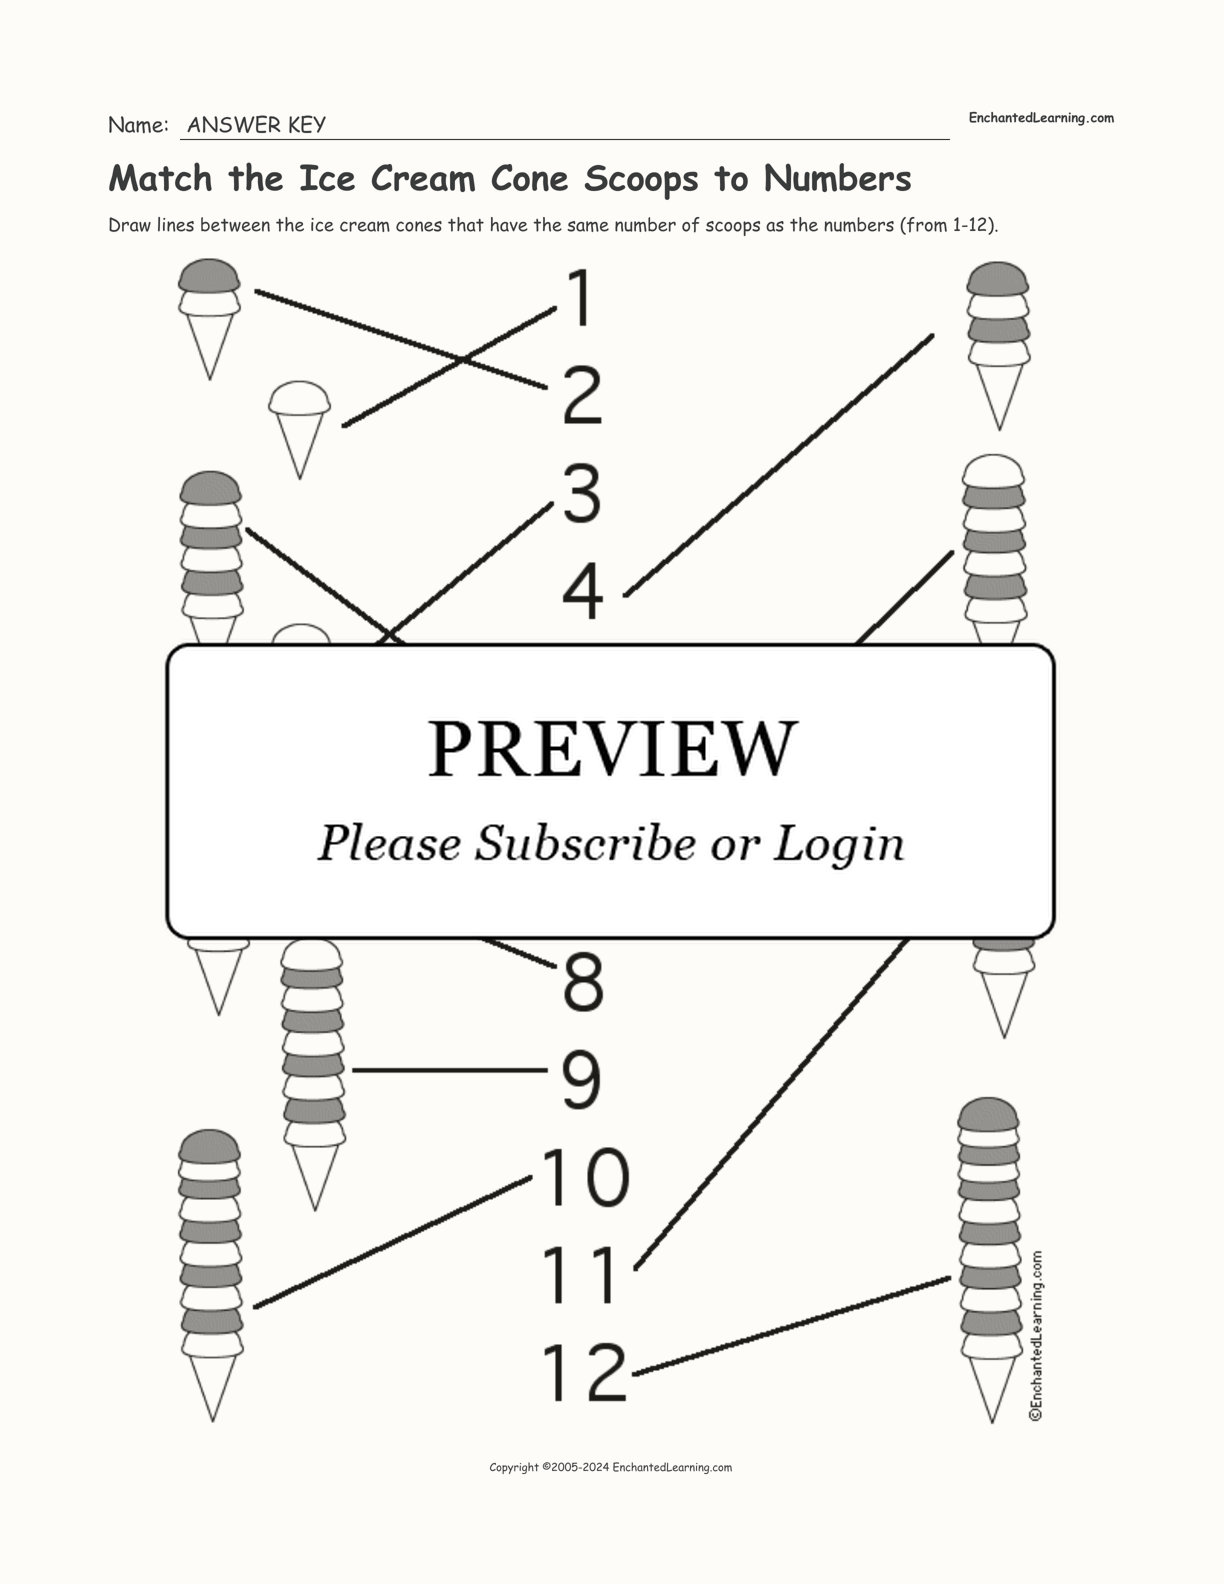 Match the Ice Cream Cone Scoops to Numbers interactive worksheet page 2